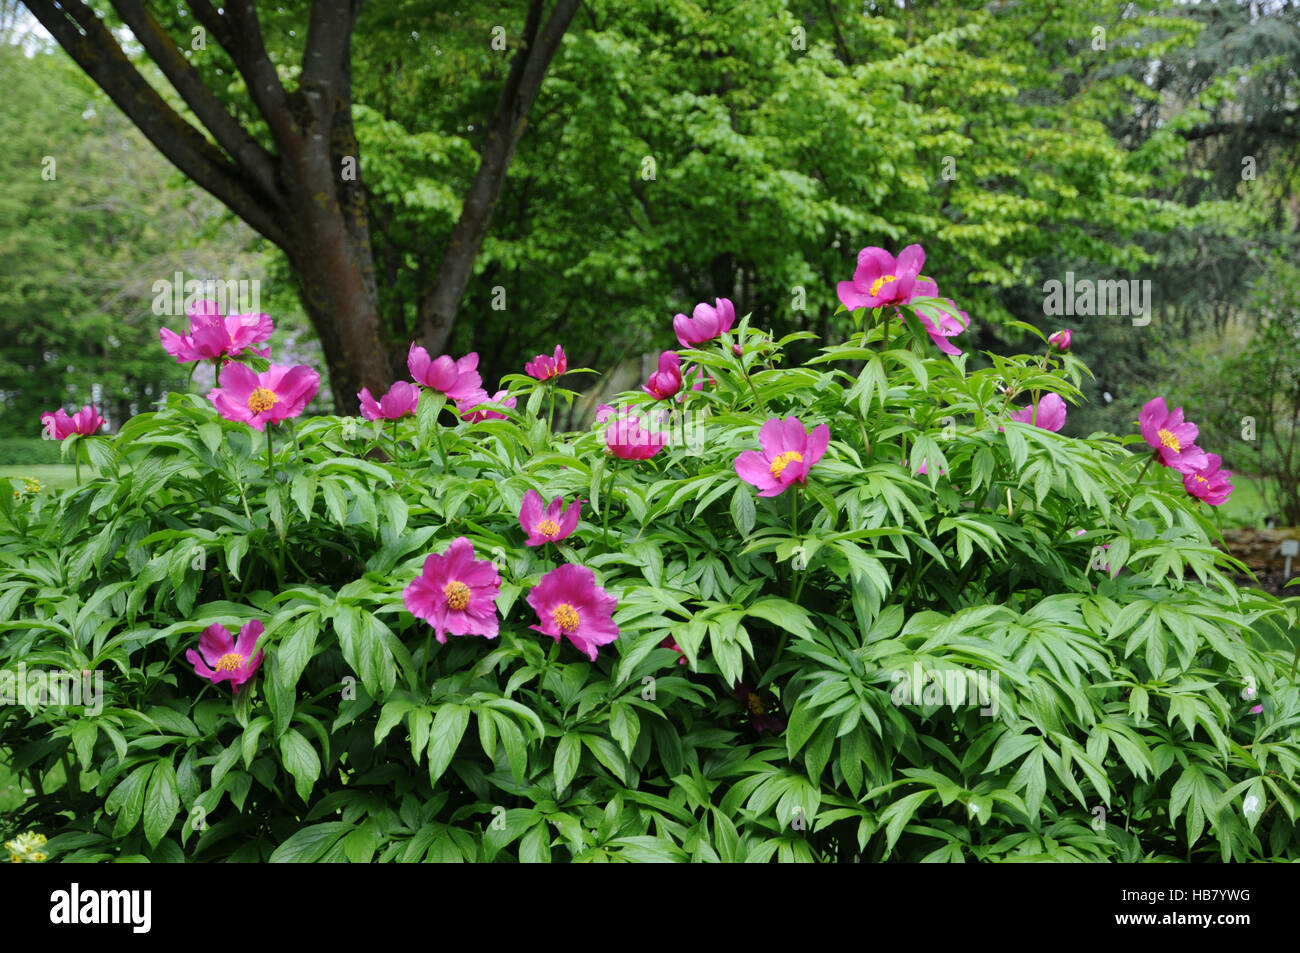 Paeonia mairei, pivoine forestiers Banque D'Images